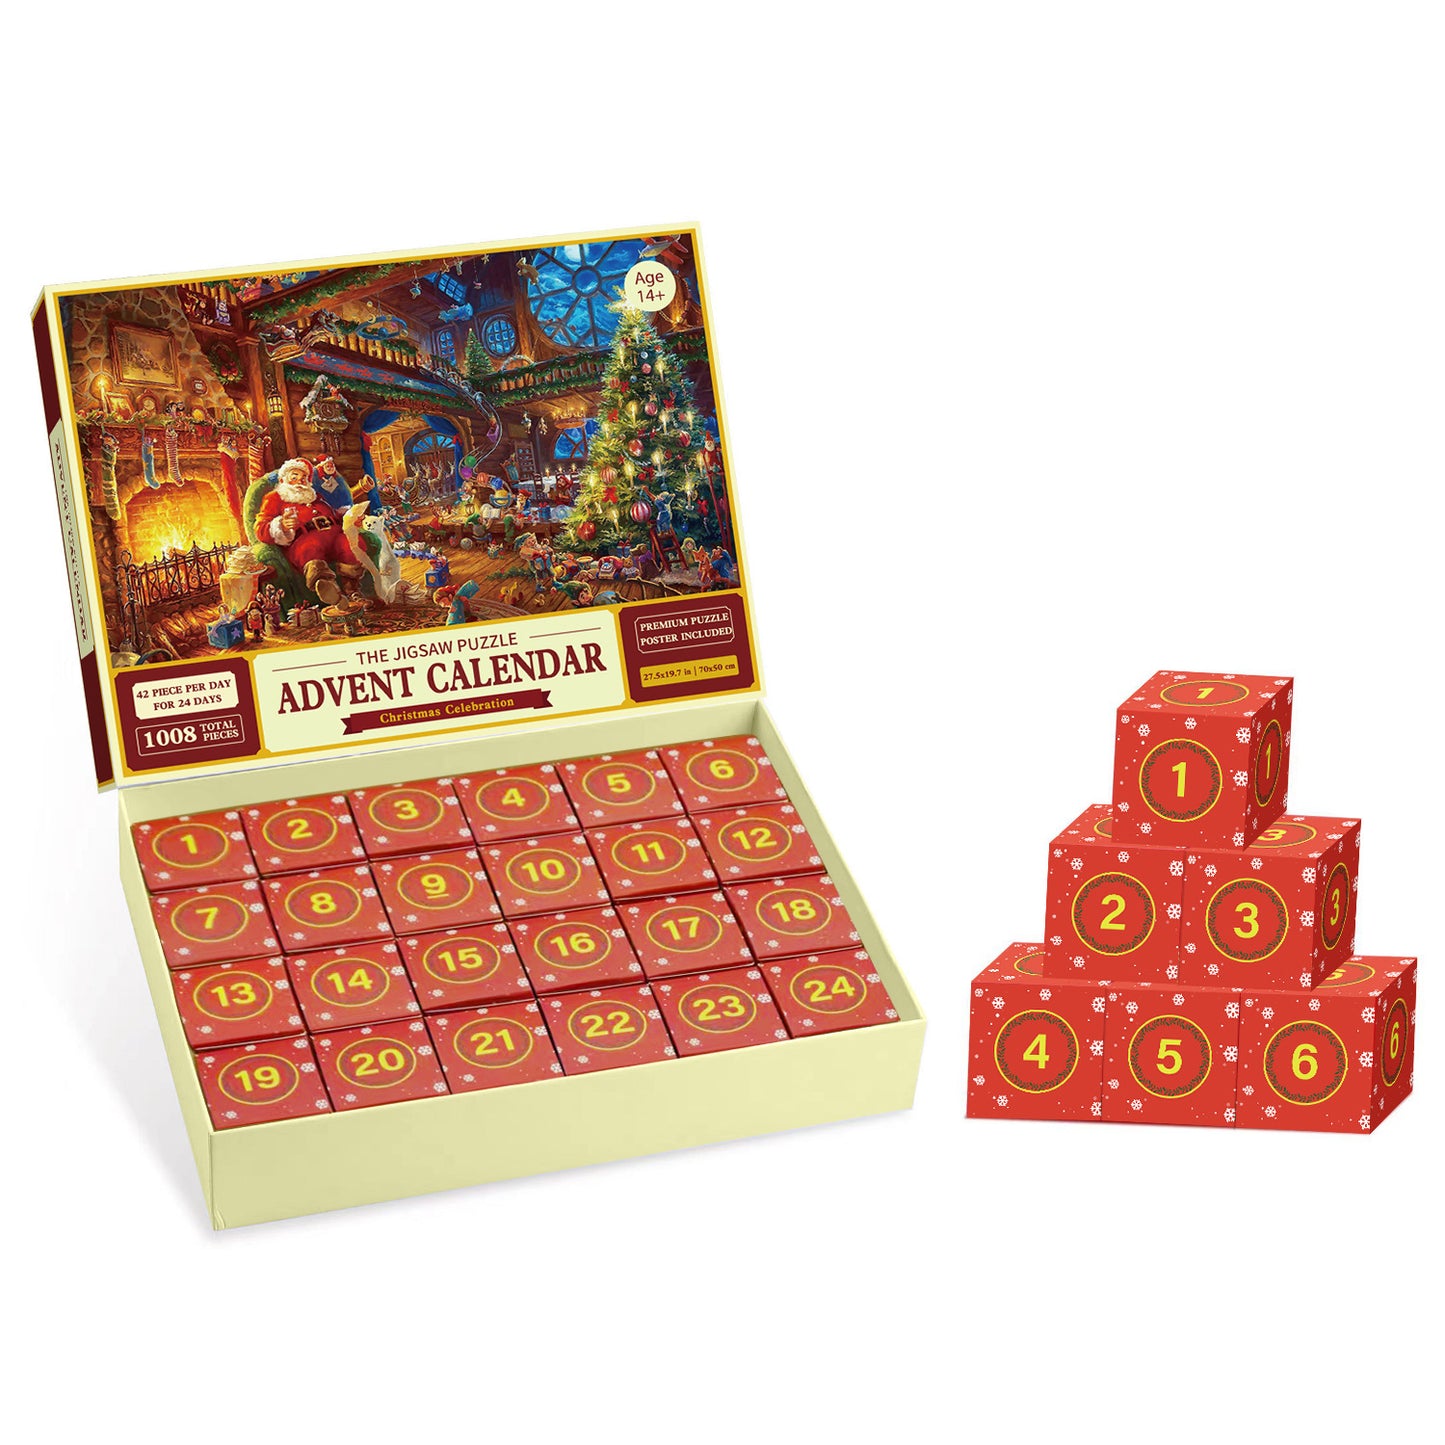 MISITU Jigsaw Puzzles Christmas Advent Calendar 1008 Pieces Puzzles 28 x 20 Inches